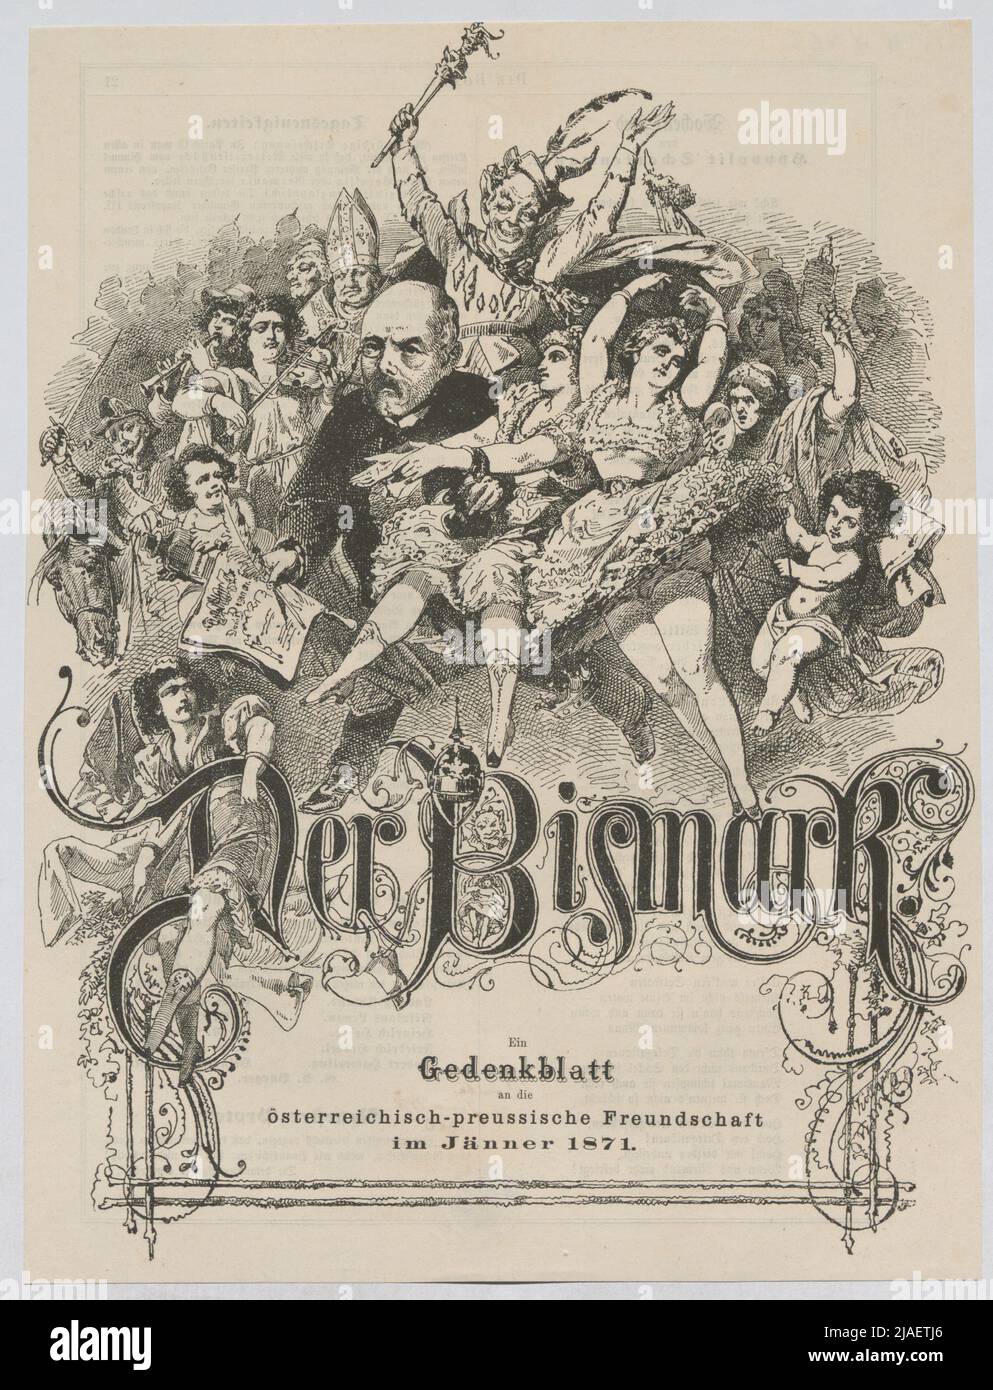 The Bismarck (yourself!). A memorial sheet to the Austrian-Prussian friendship in January 1871 (caricature from 'Die Bomb'). Franz Kollarz (Kolá) (1825-1894), Caricaturist Stock Photo